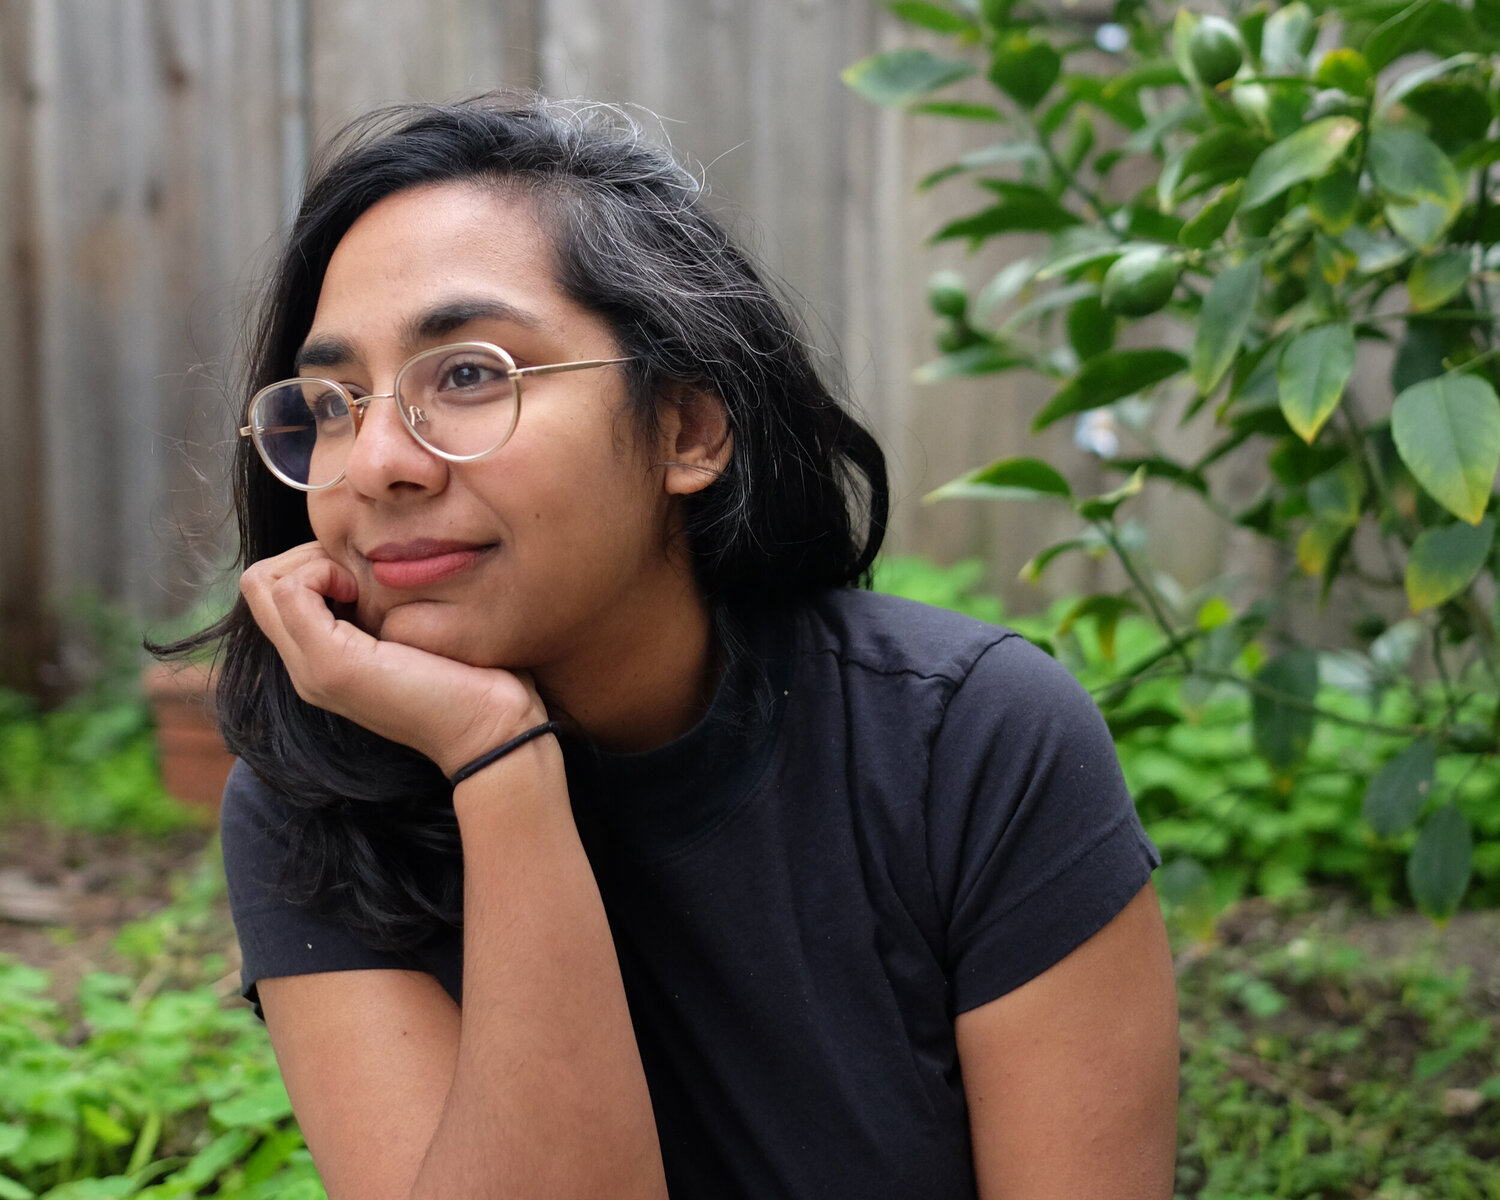 Color photograph of a brown skinned woman with dark hair wearing glasses; she sits in a garden or backyard location with a wooden fence behind her, her hand resting on her chin as she looks off camera